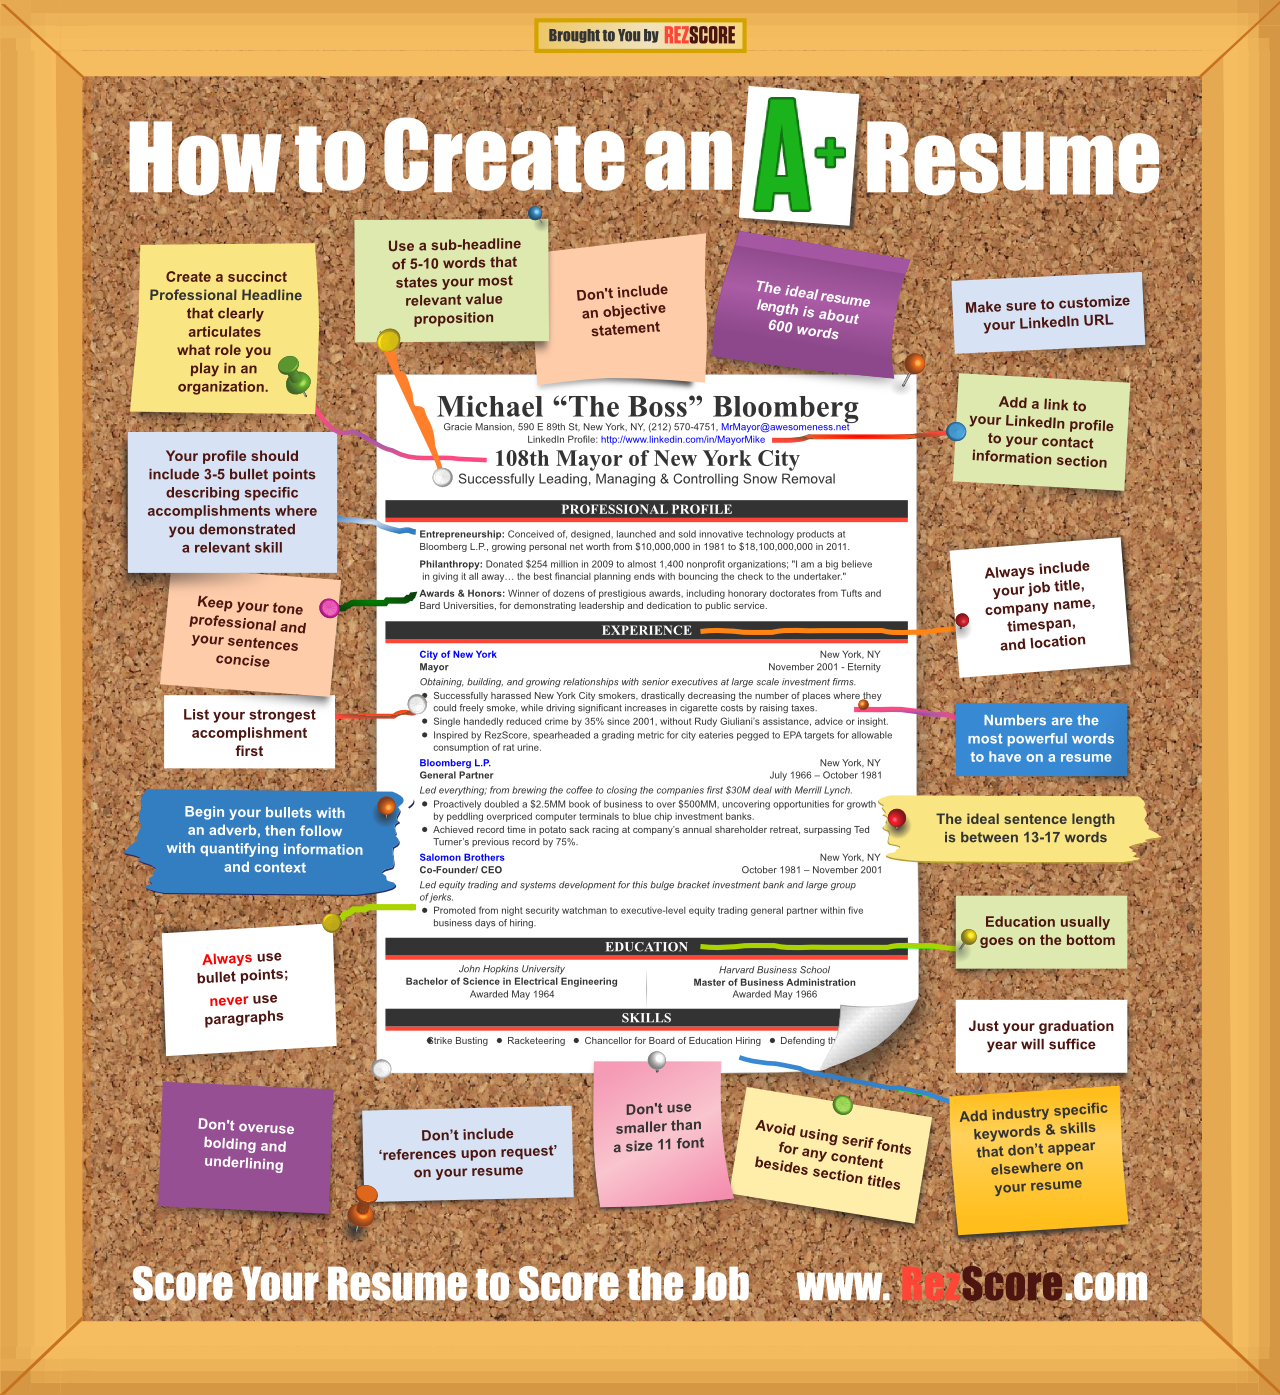 How to Create an A+ Resume